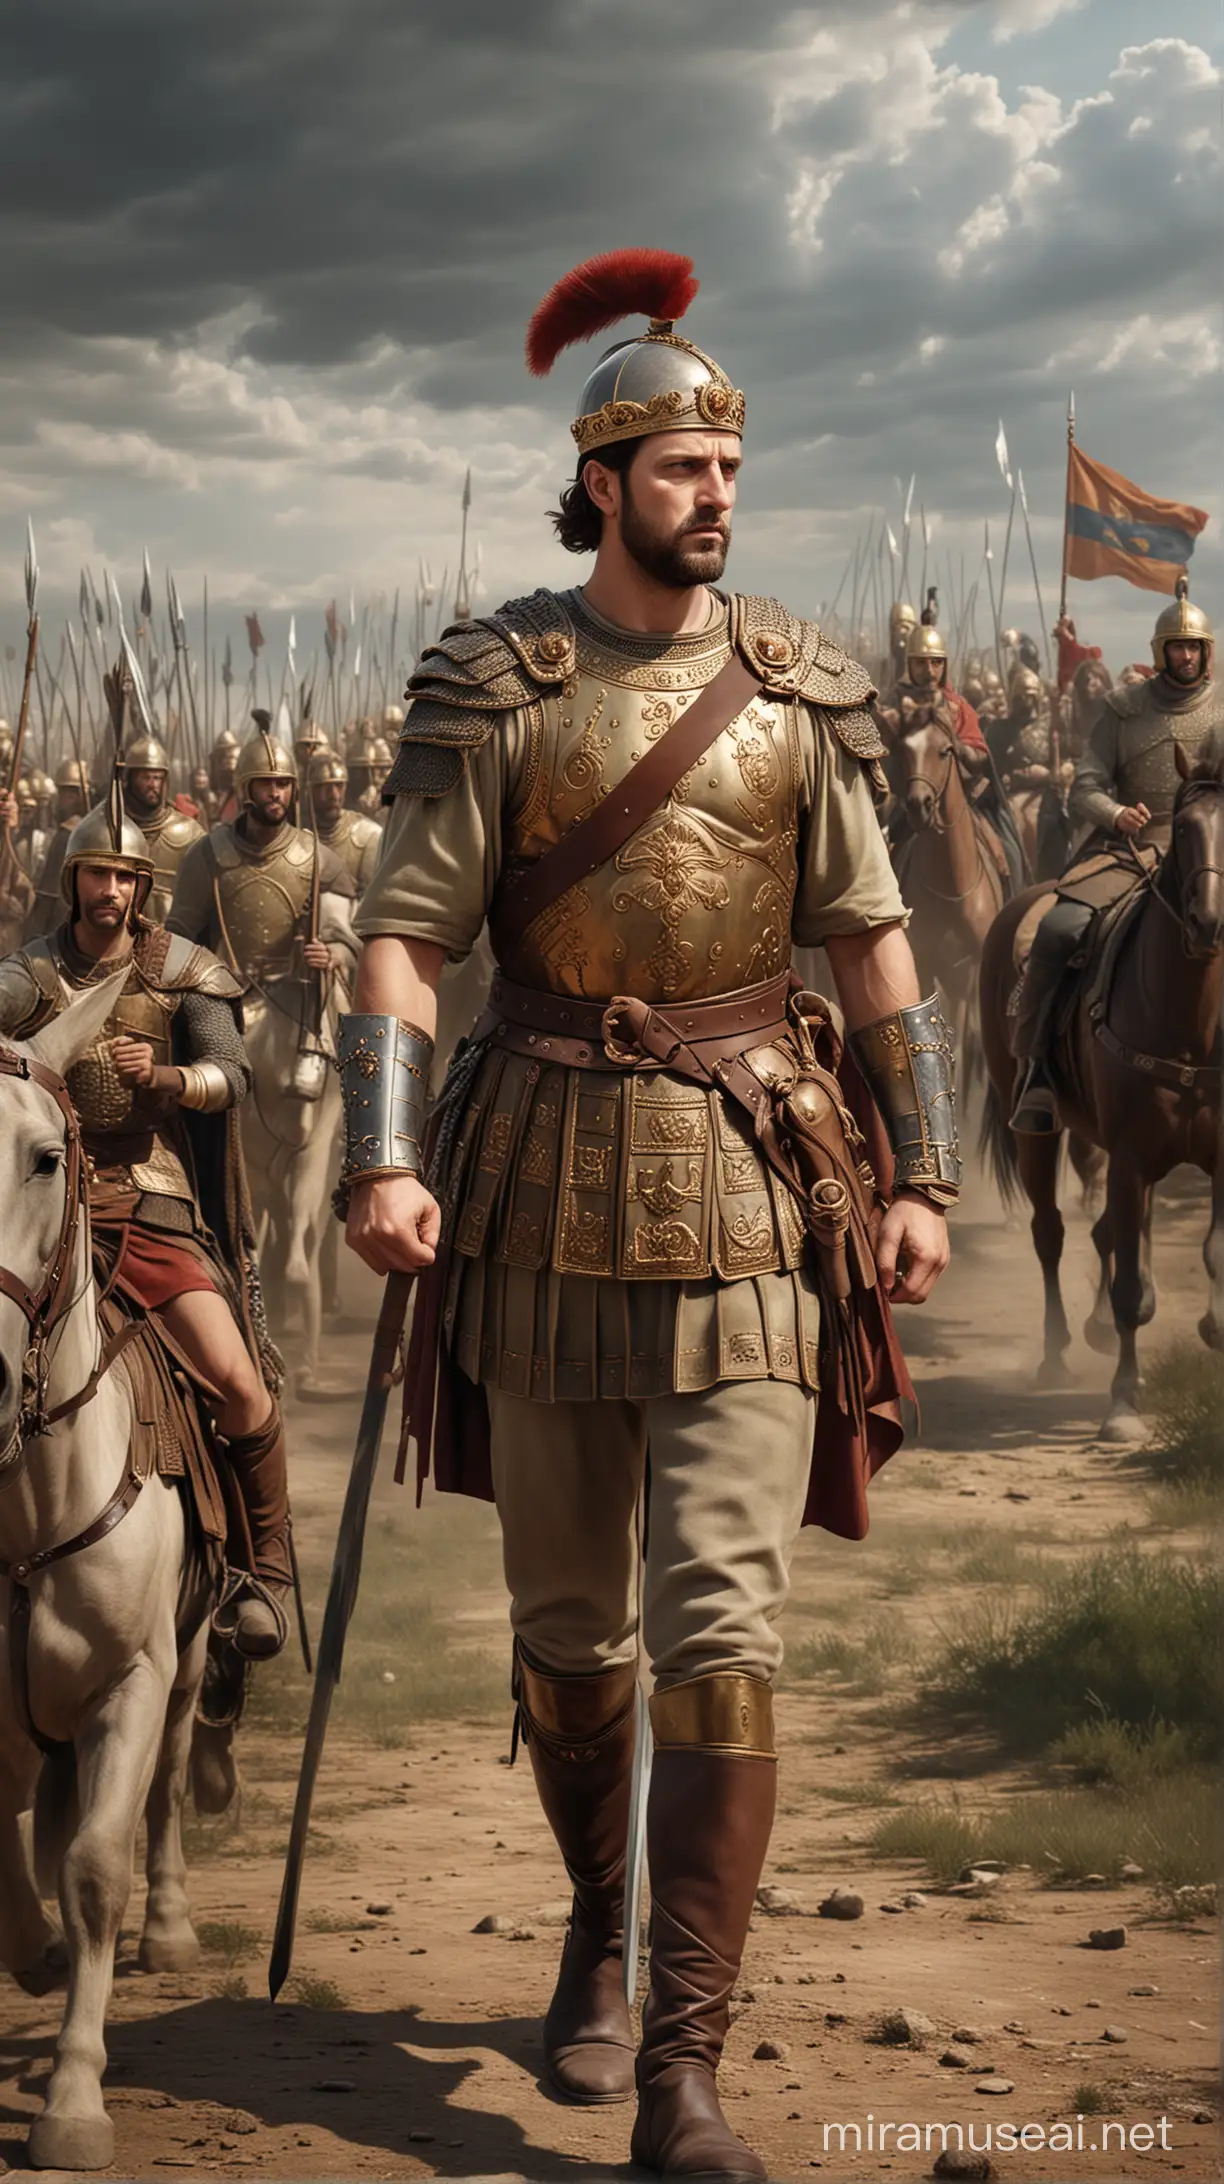 Visual representation of Philip II, King of Macedonia, depicted in battle or strategizing military campaigns, showcasing his role as a dominant figure in Alexander's early life. hyperrealistic